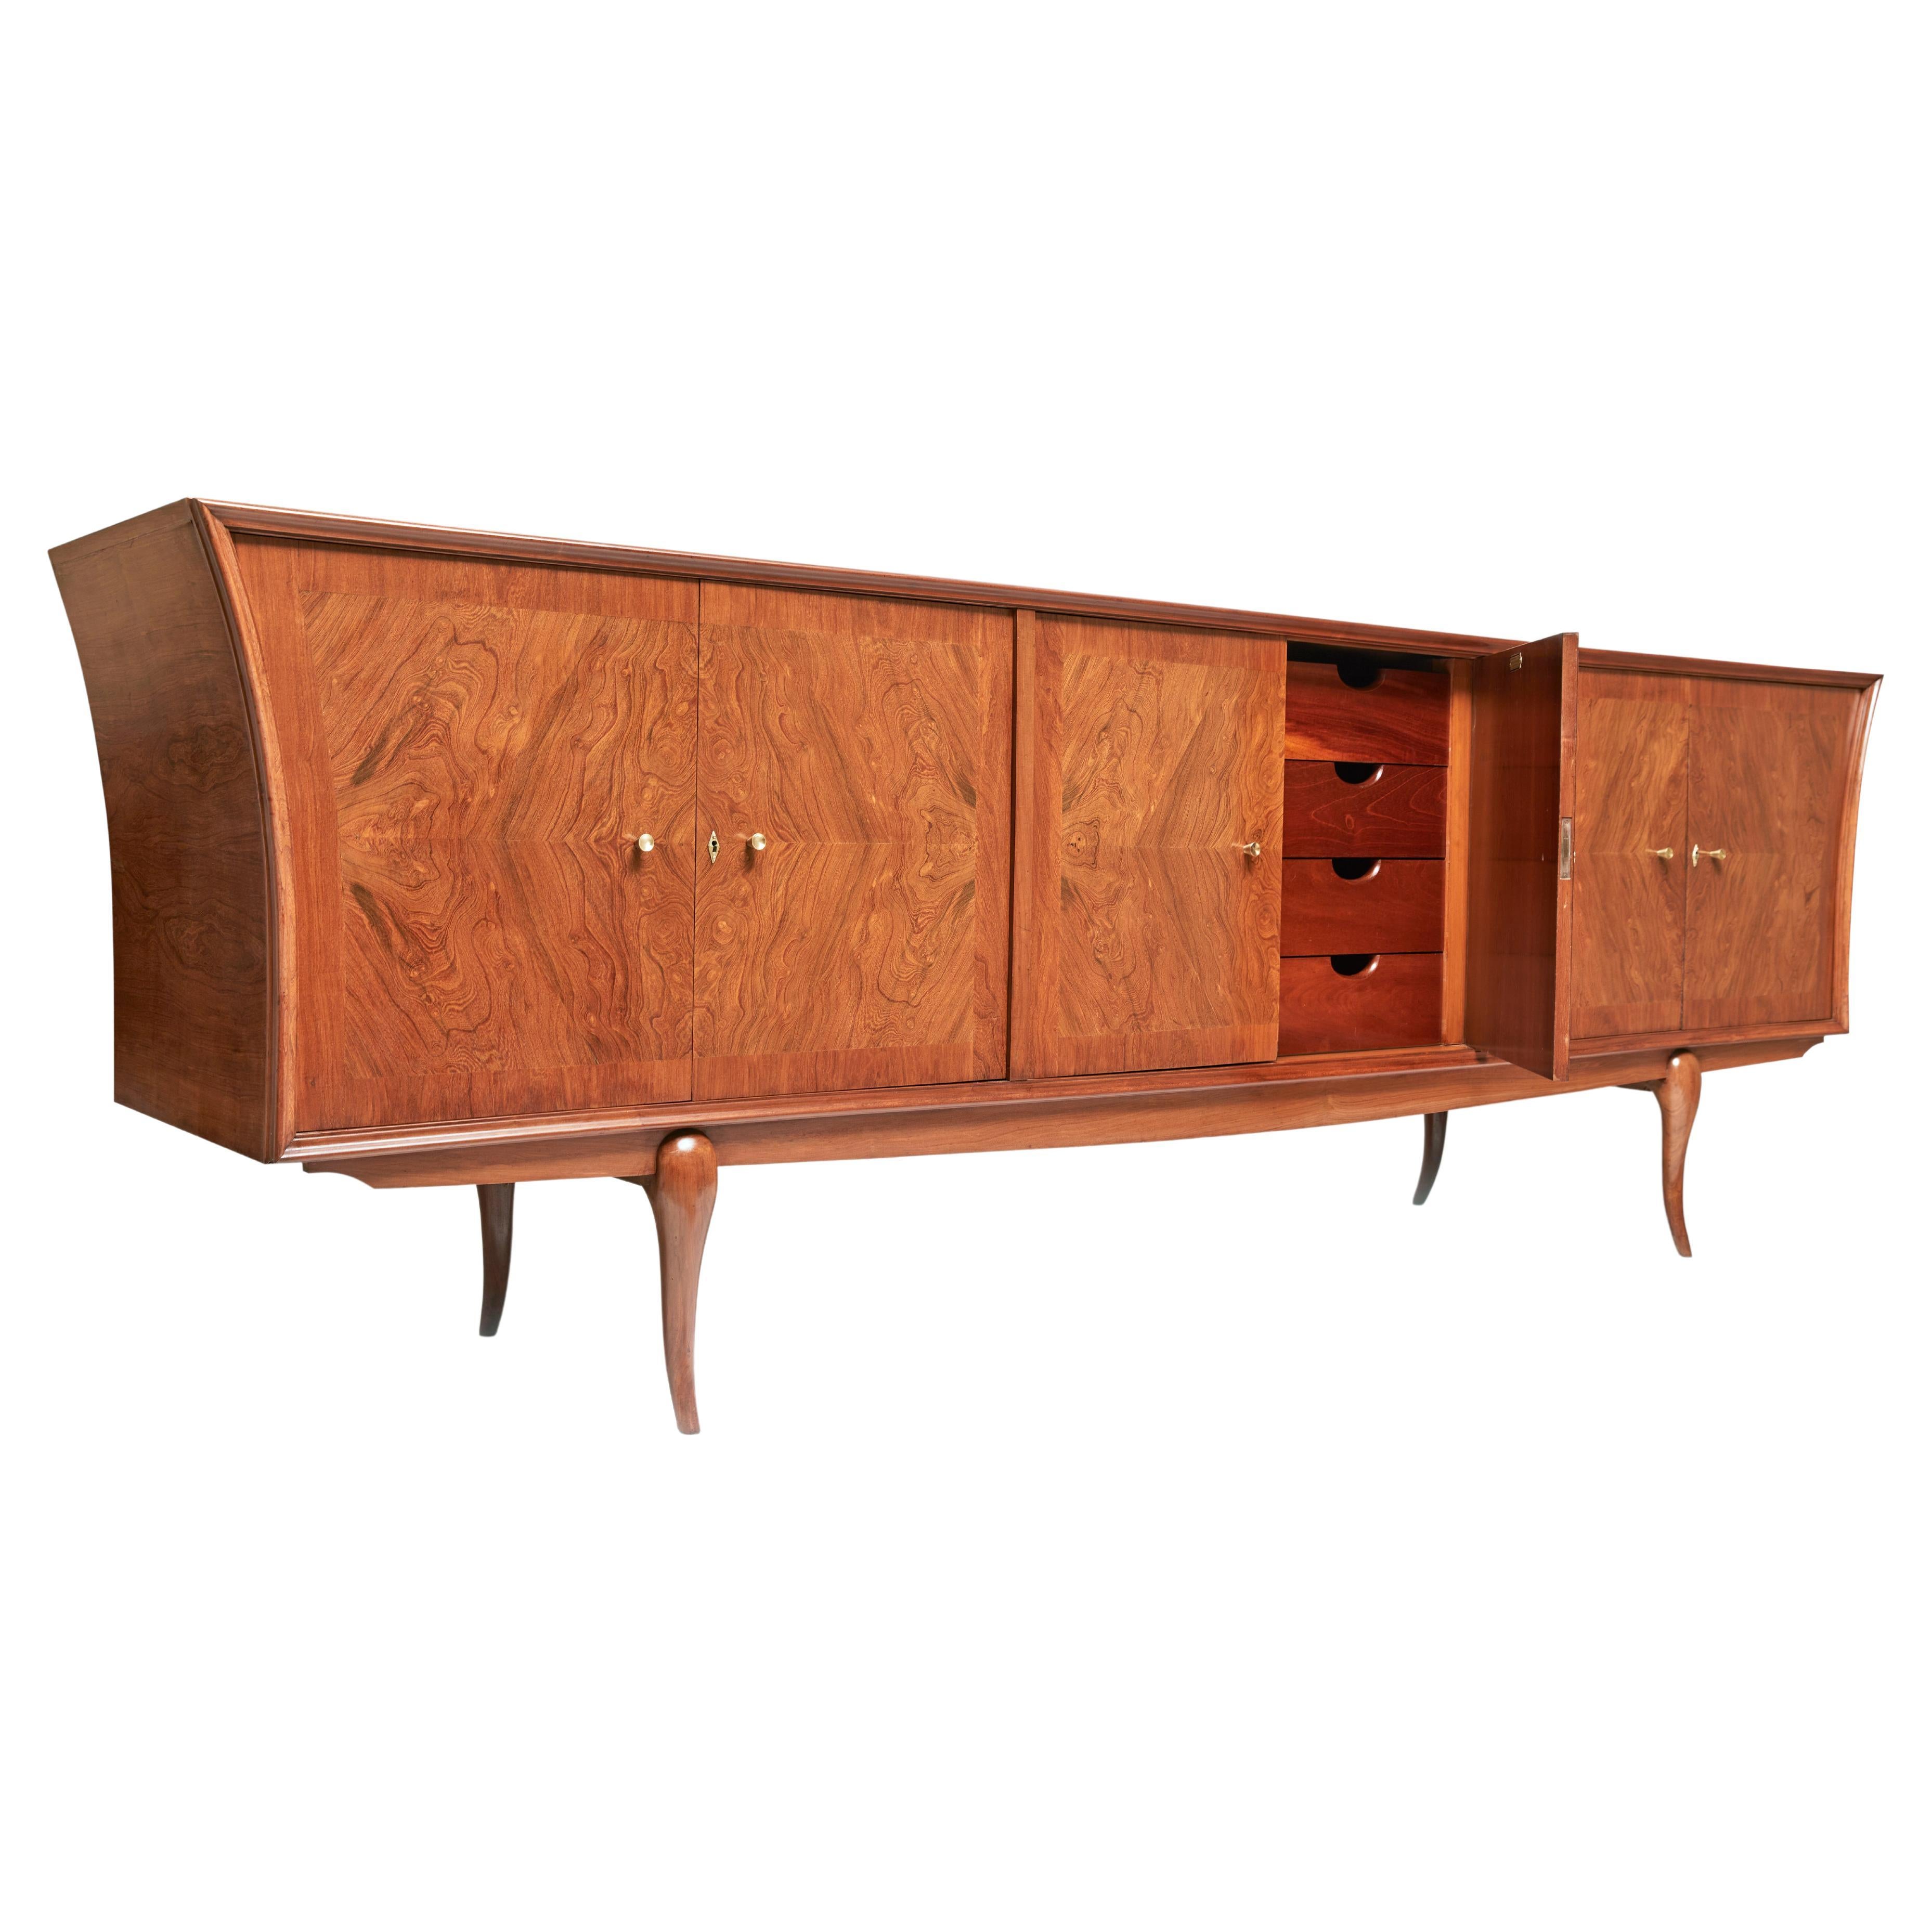 Hand-Carved Mid-Century Modern Credenza in Caviuna Hardwood by Giuseppe Scapinelli, 1956 For Sale